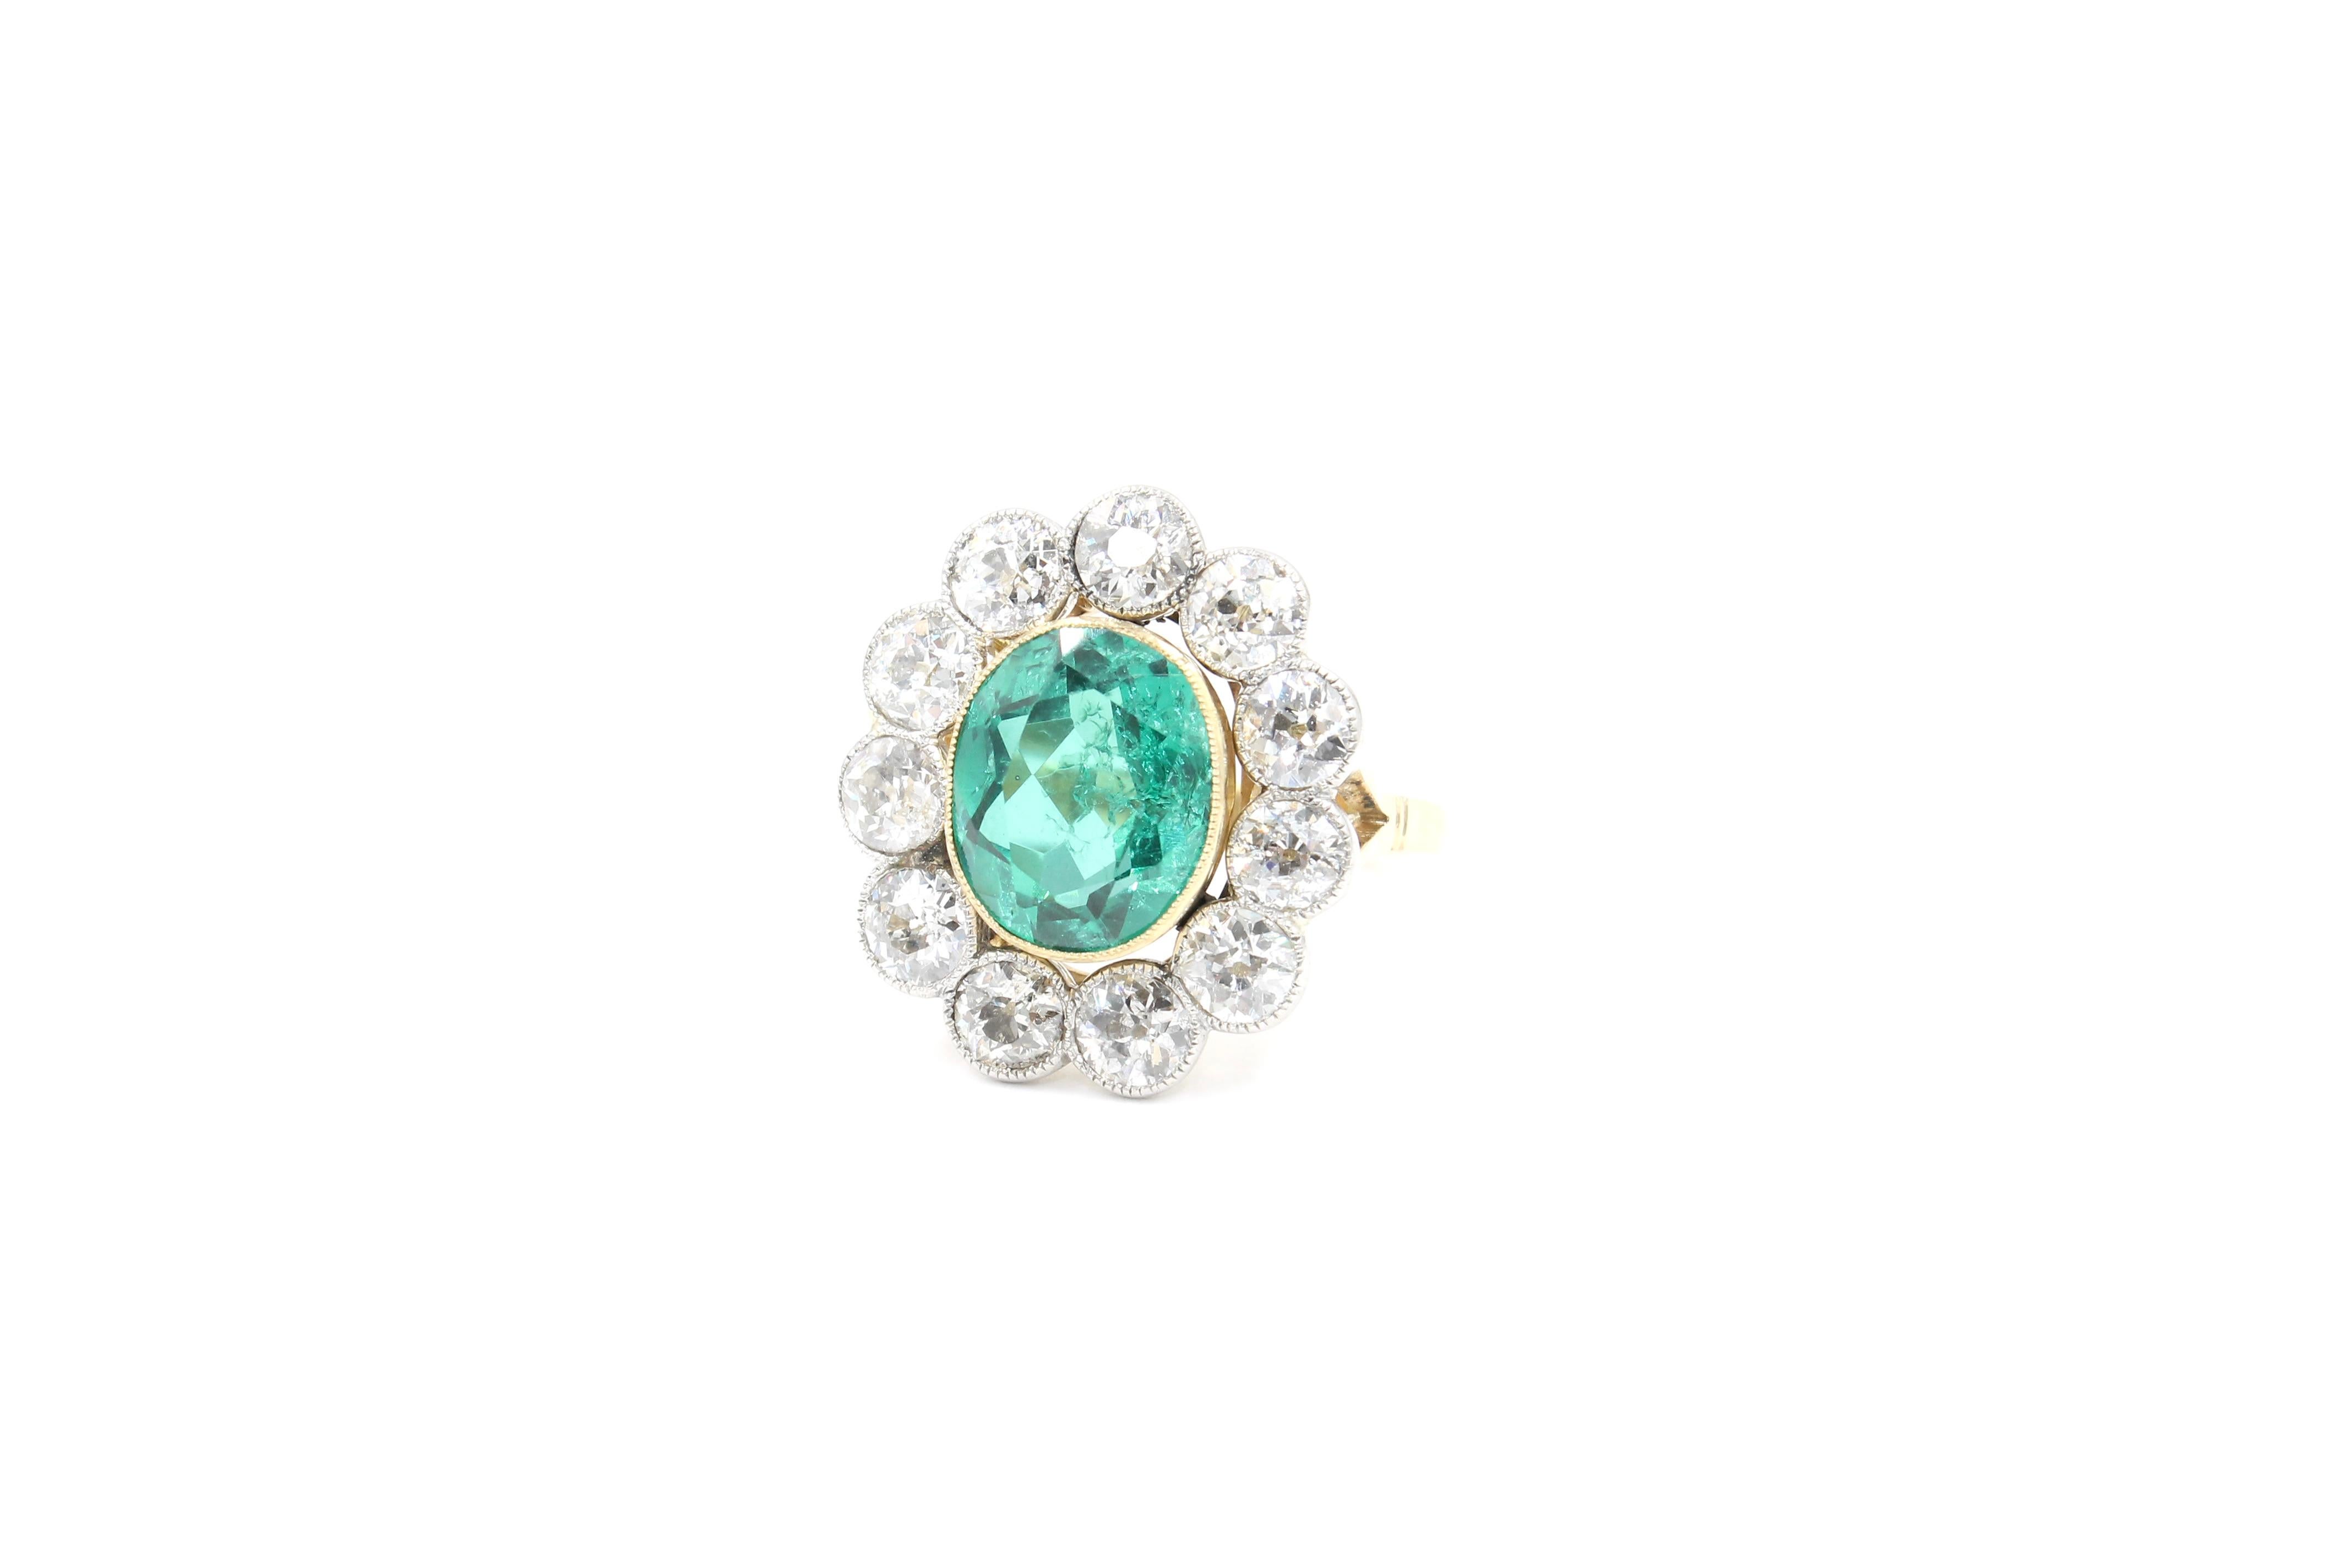 Oval Cut Antique Colombian Emerald (+/- 2.90 Carats) and diamonds cluster ring circa 1910